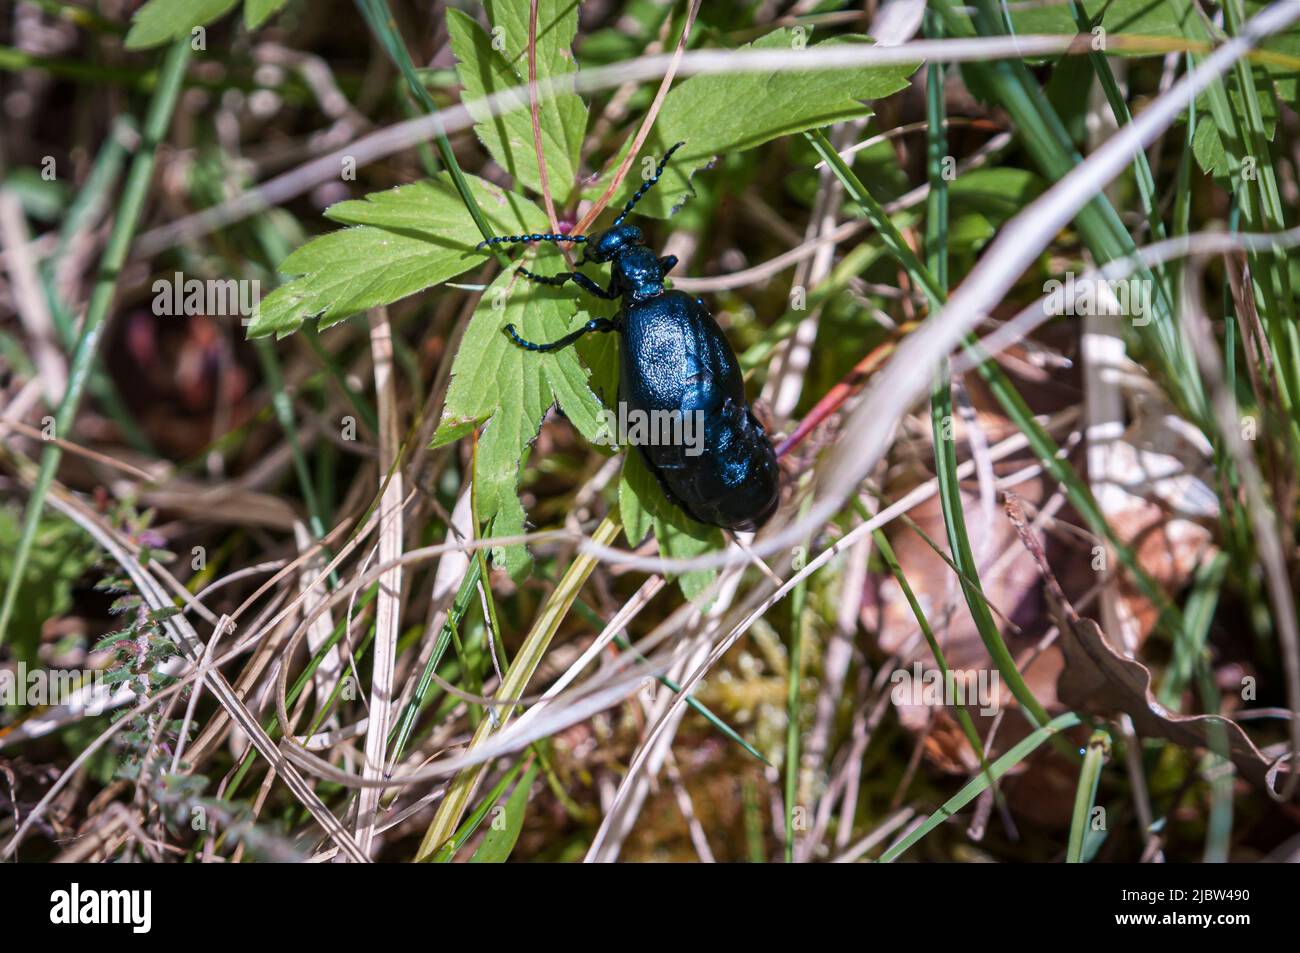 A Sunny summer HDR image of a Black-Blue Oil Beetle, Meloe violaceus, moving through the undergrowth, Lochaber, Scotland. 28 May 2022 Stock Photo